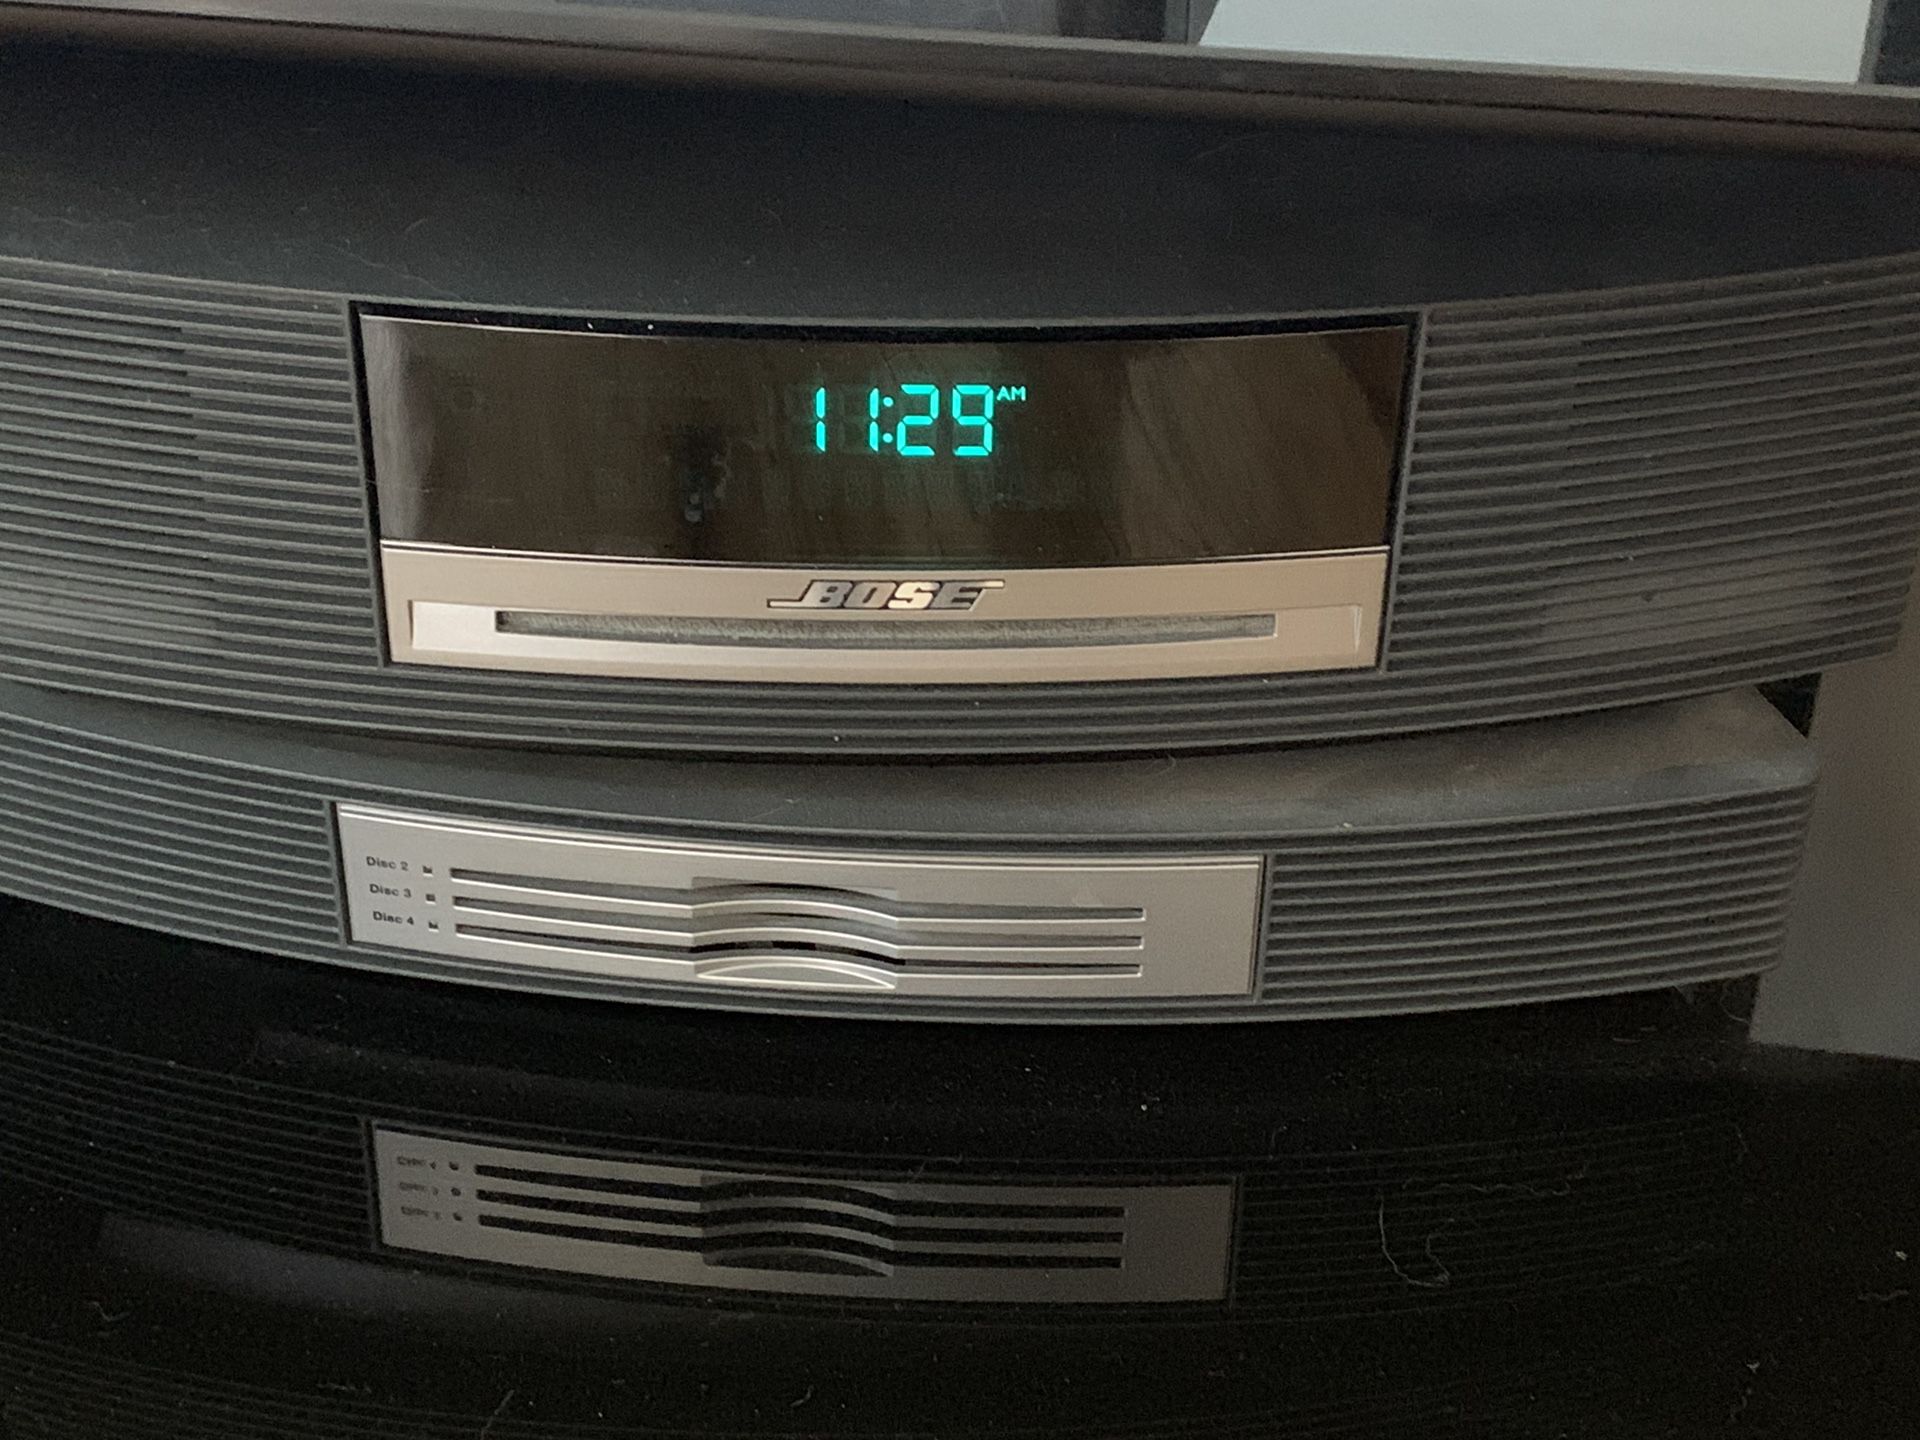 Bose CD player and Bose Radio home theatre